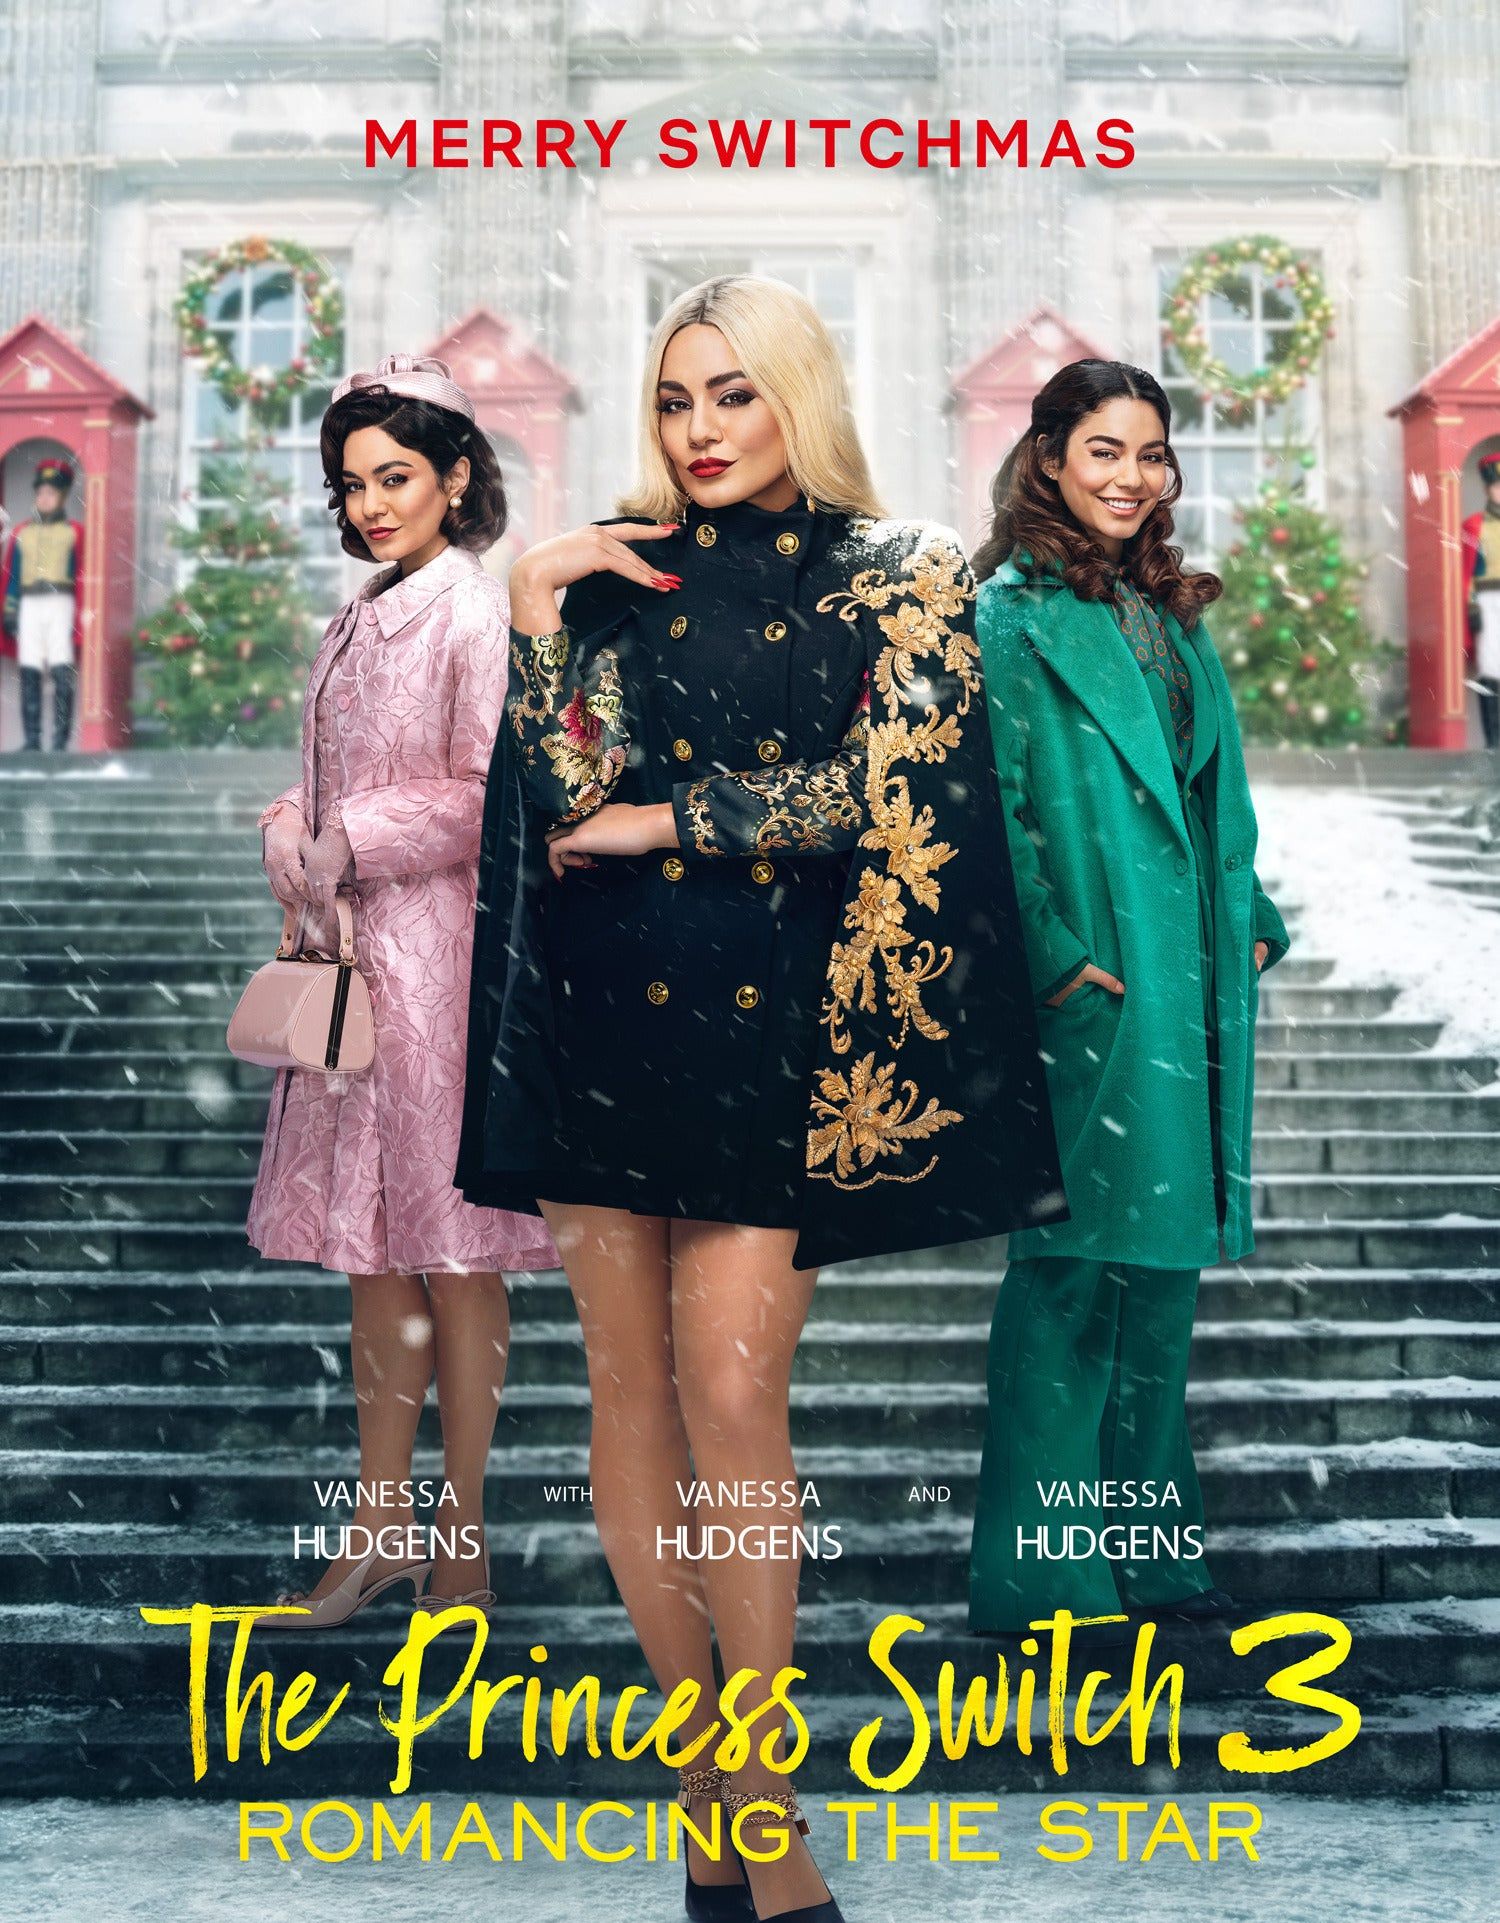 Is The Princess Switch 3 Romancing the Star on Netflix